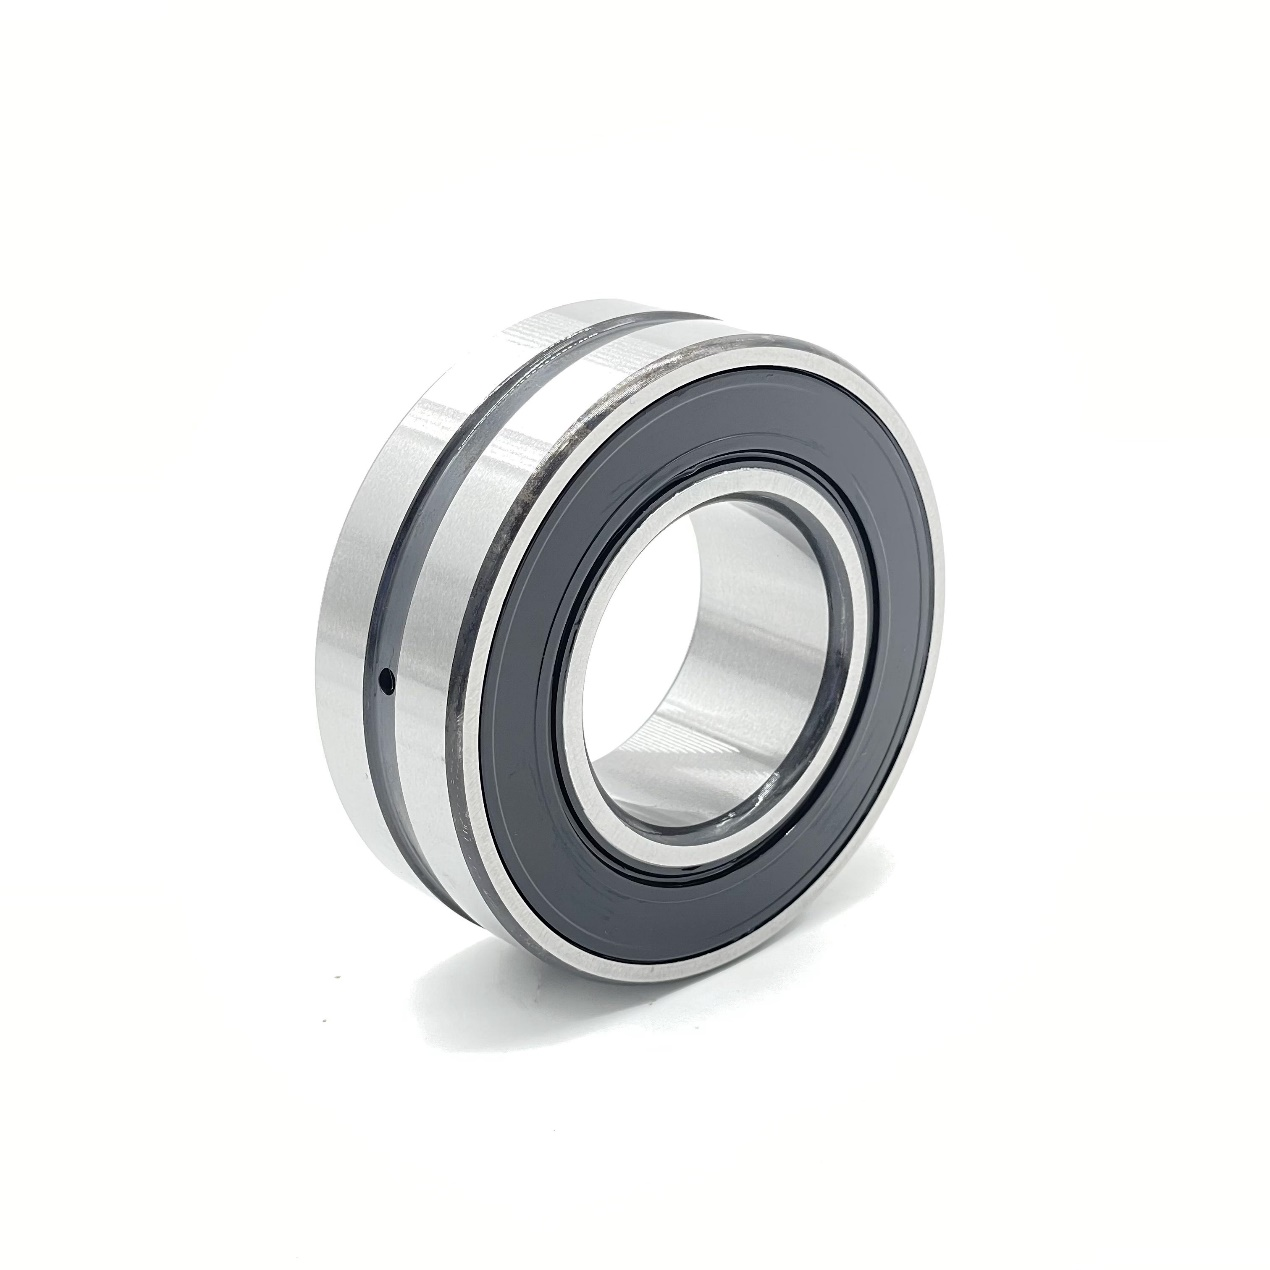 The usual selection steps for sealed self-aligning roller bearings are as follows